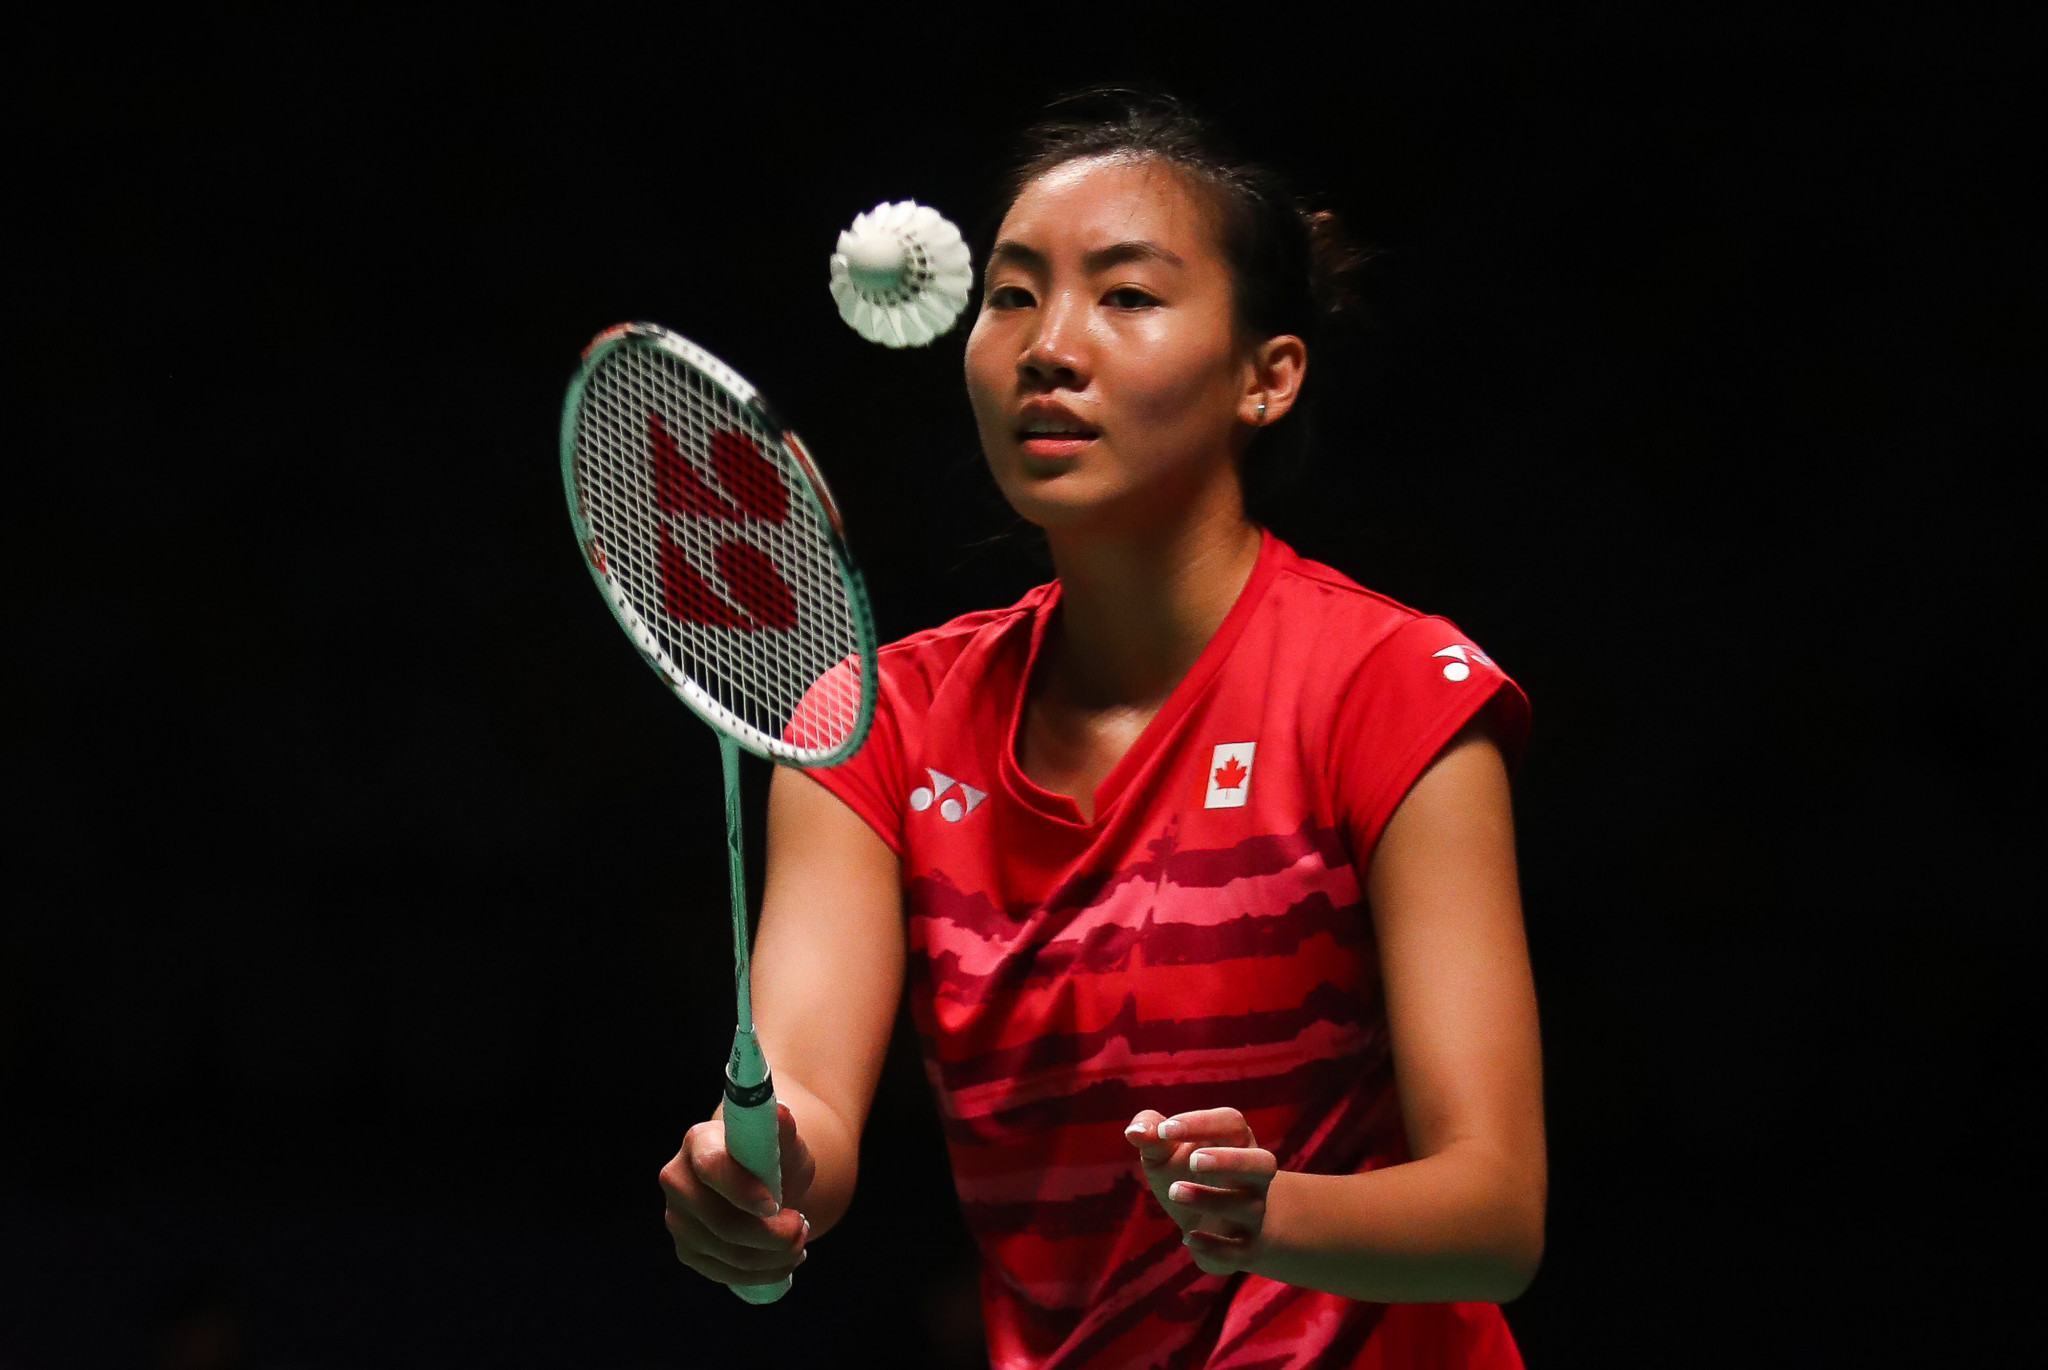 Canada's women's singles top seed Michelle Li is due to face Mexico's Jessica Jazmin Bautista Trigueros in the second round ©Getty Images